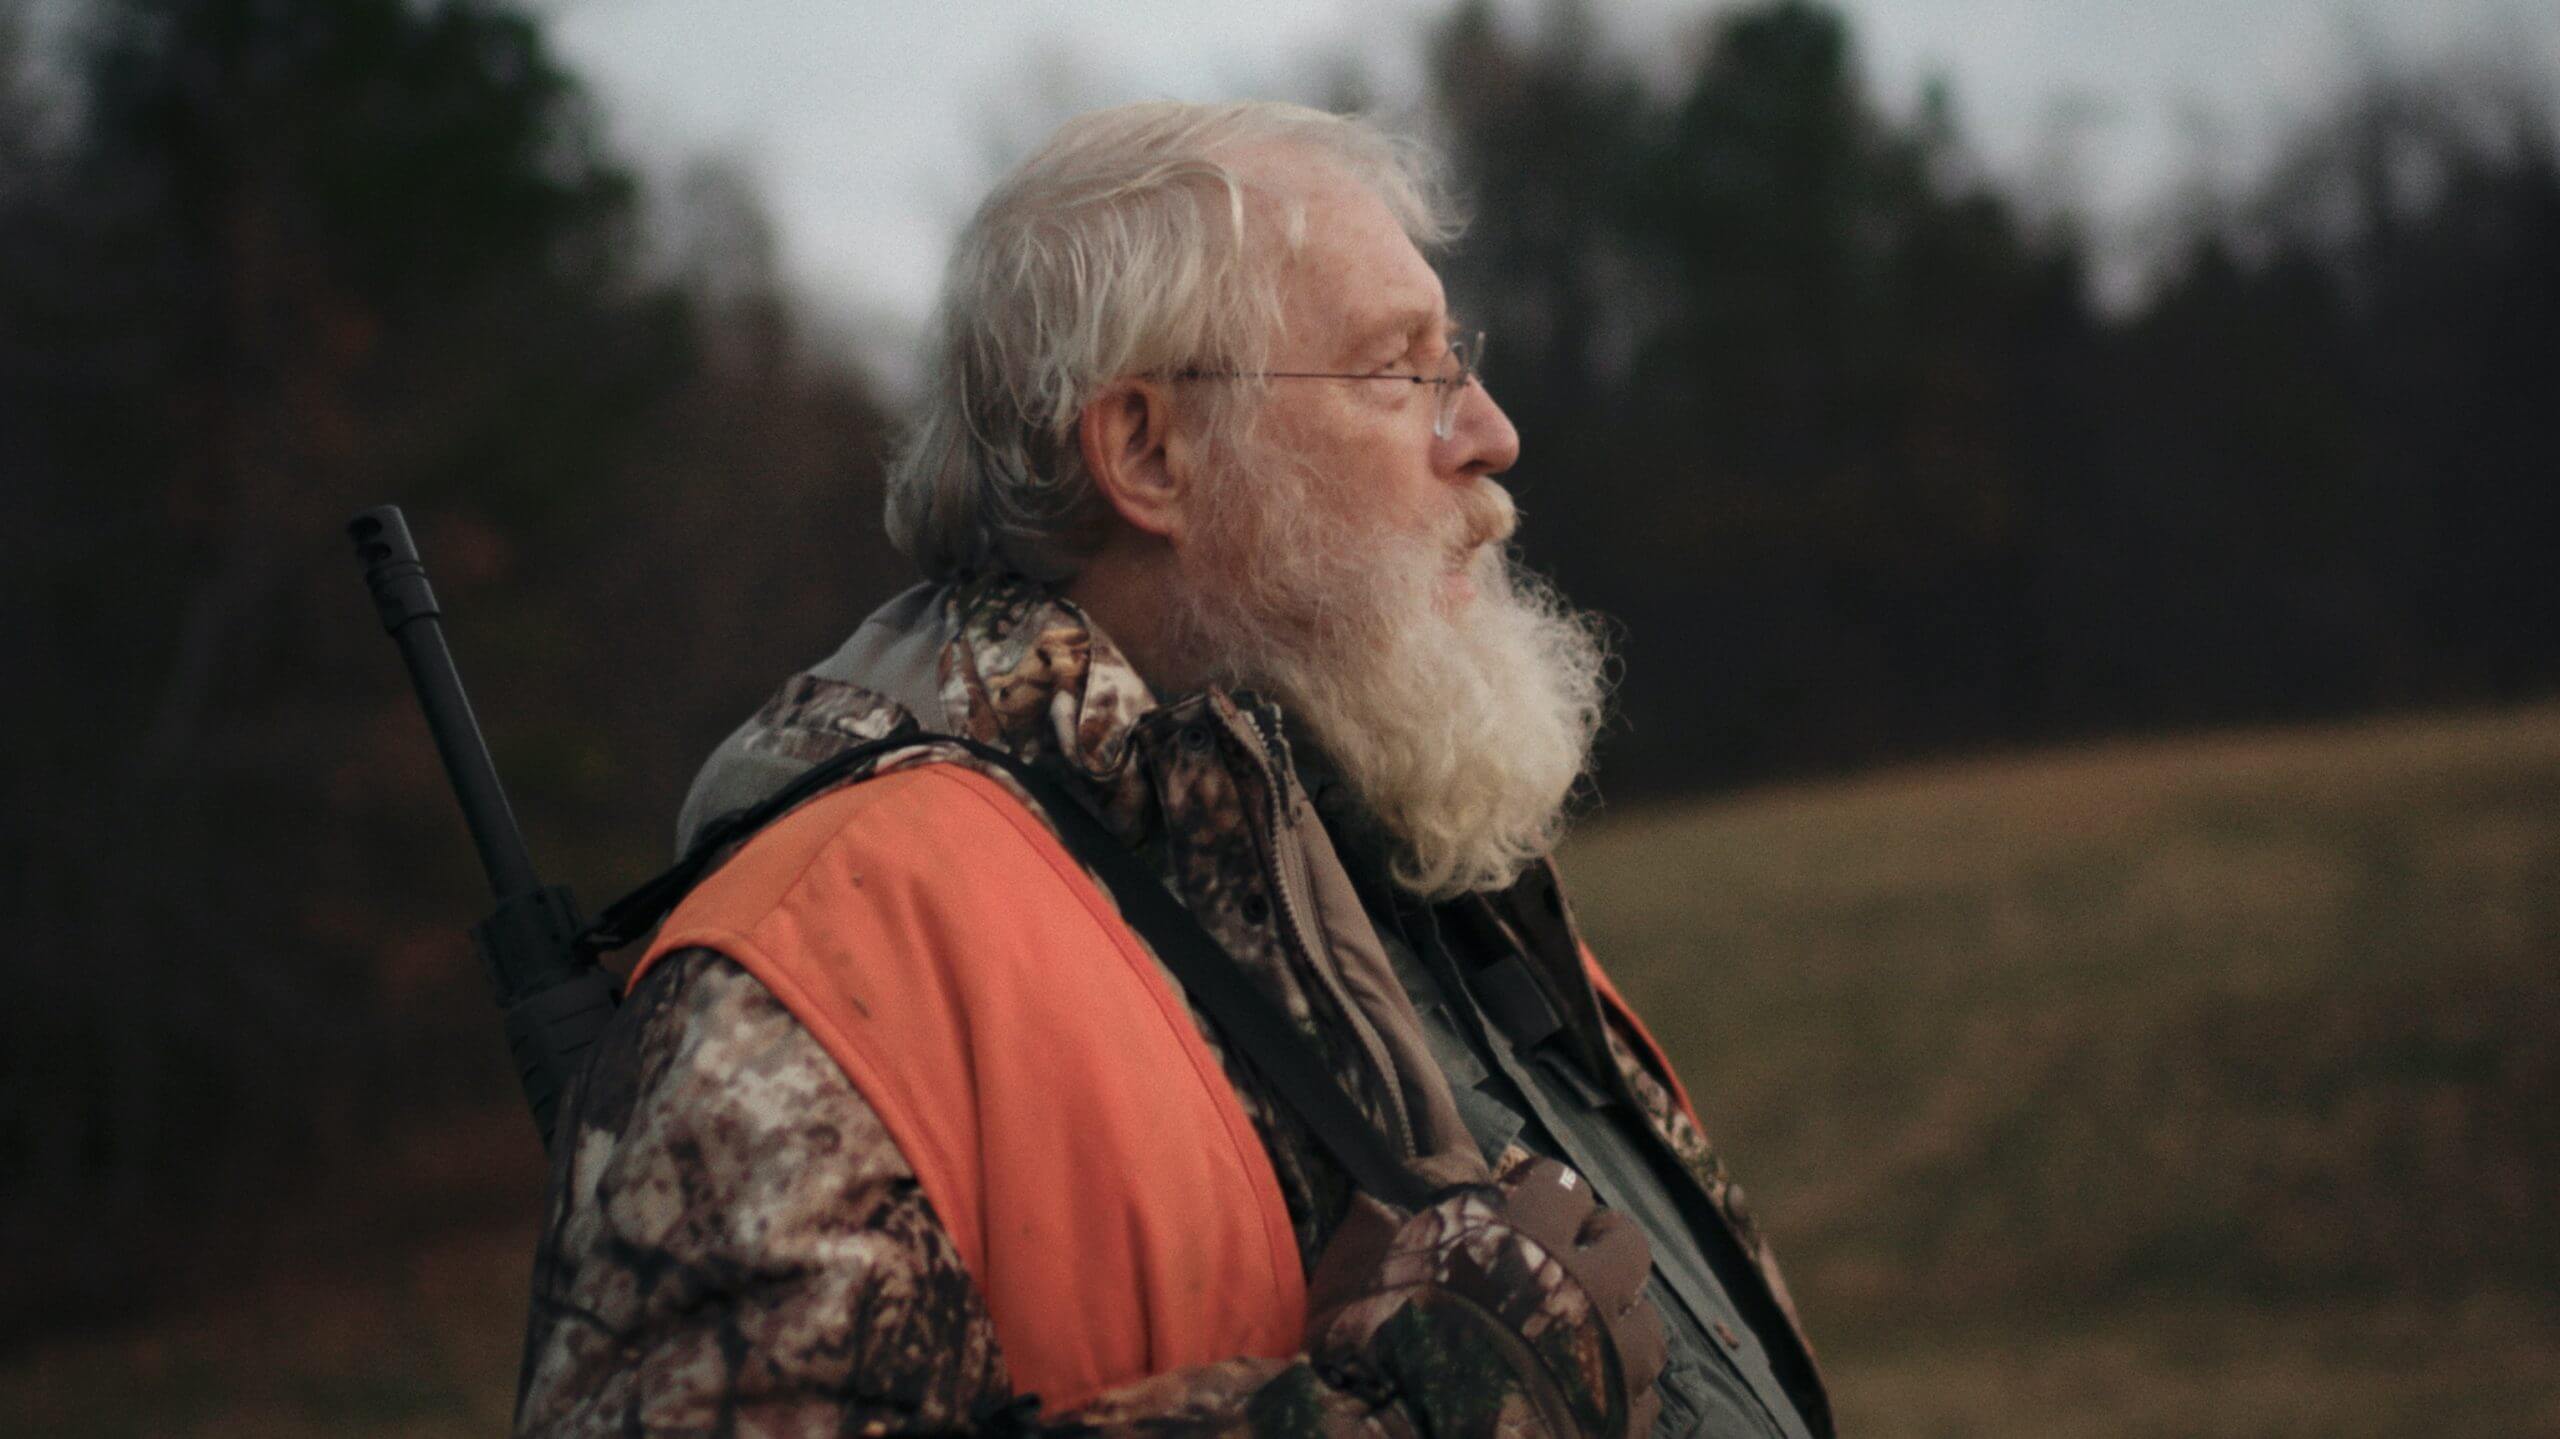 Still from One Shot One Kill. A man is standing outside, wearing a camoflauge jacket and orange vest with a gun strapped over his right shoulder.